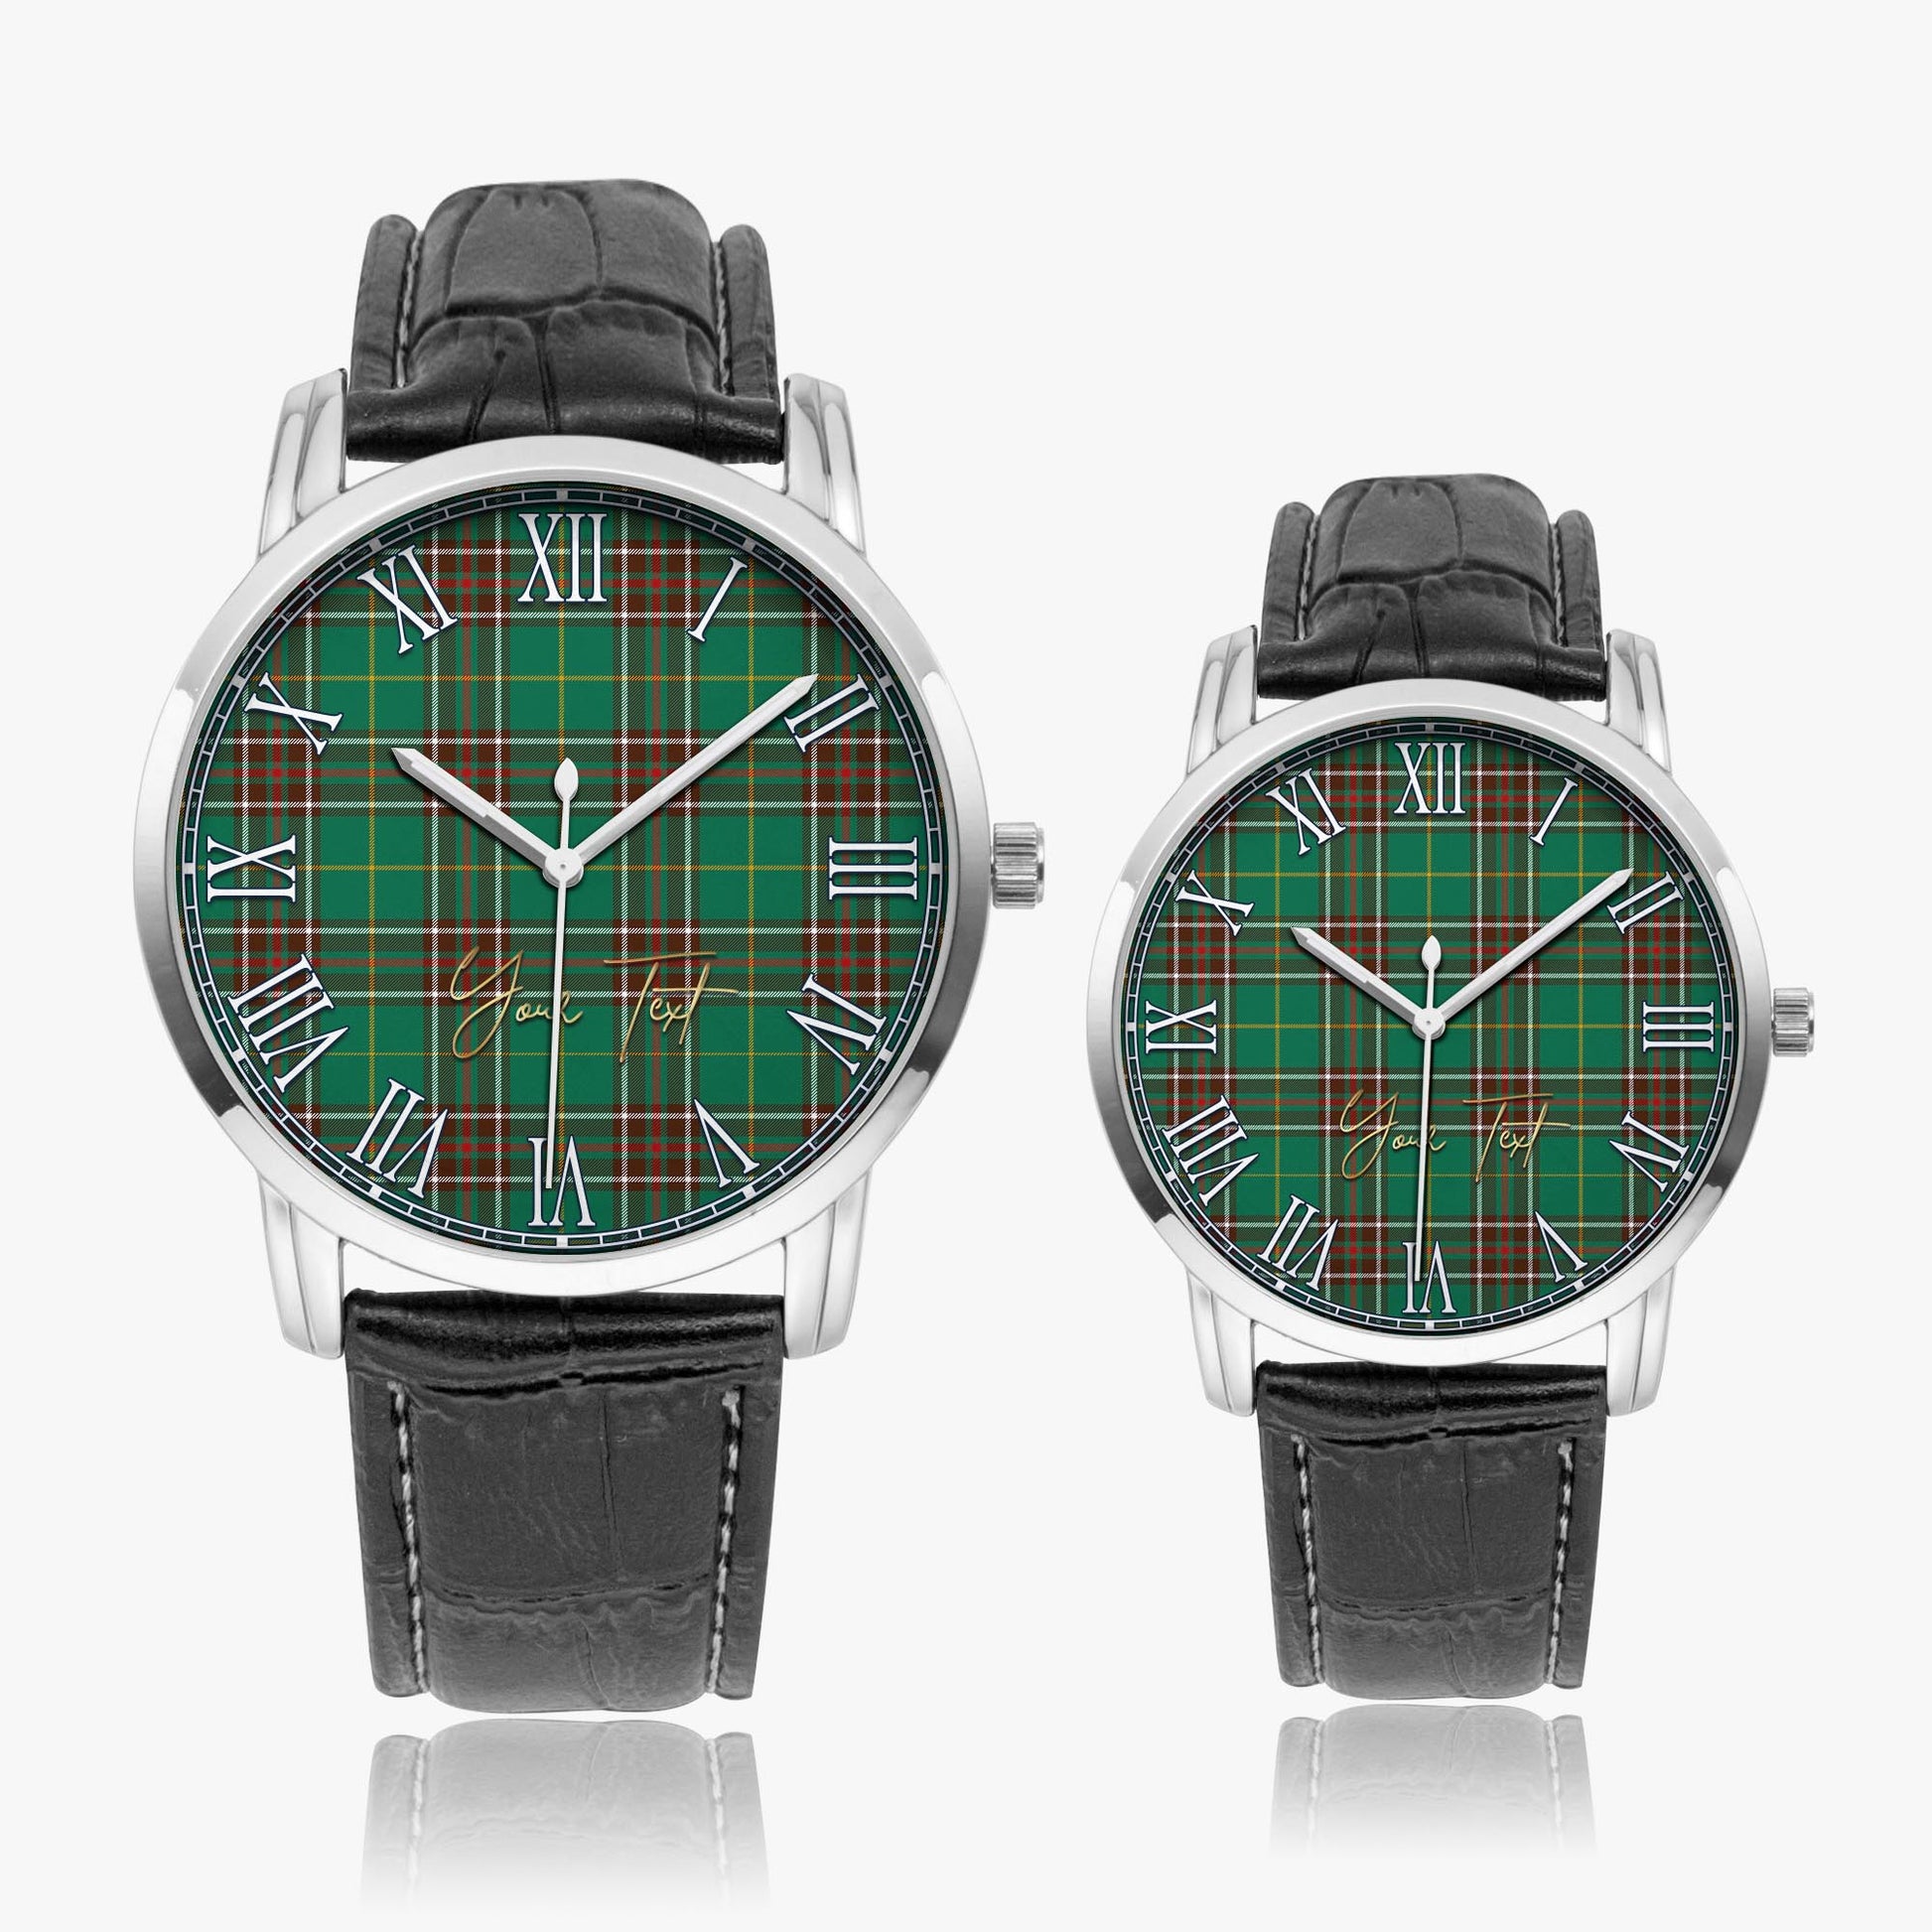 Newfoundland And Labrador Province Canada Tartan Personalized Your Text Leather Trap Quartz Watch Wide Type Silver Case With Black Leather Strap - Tartanvibesclothing